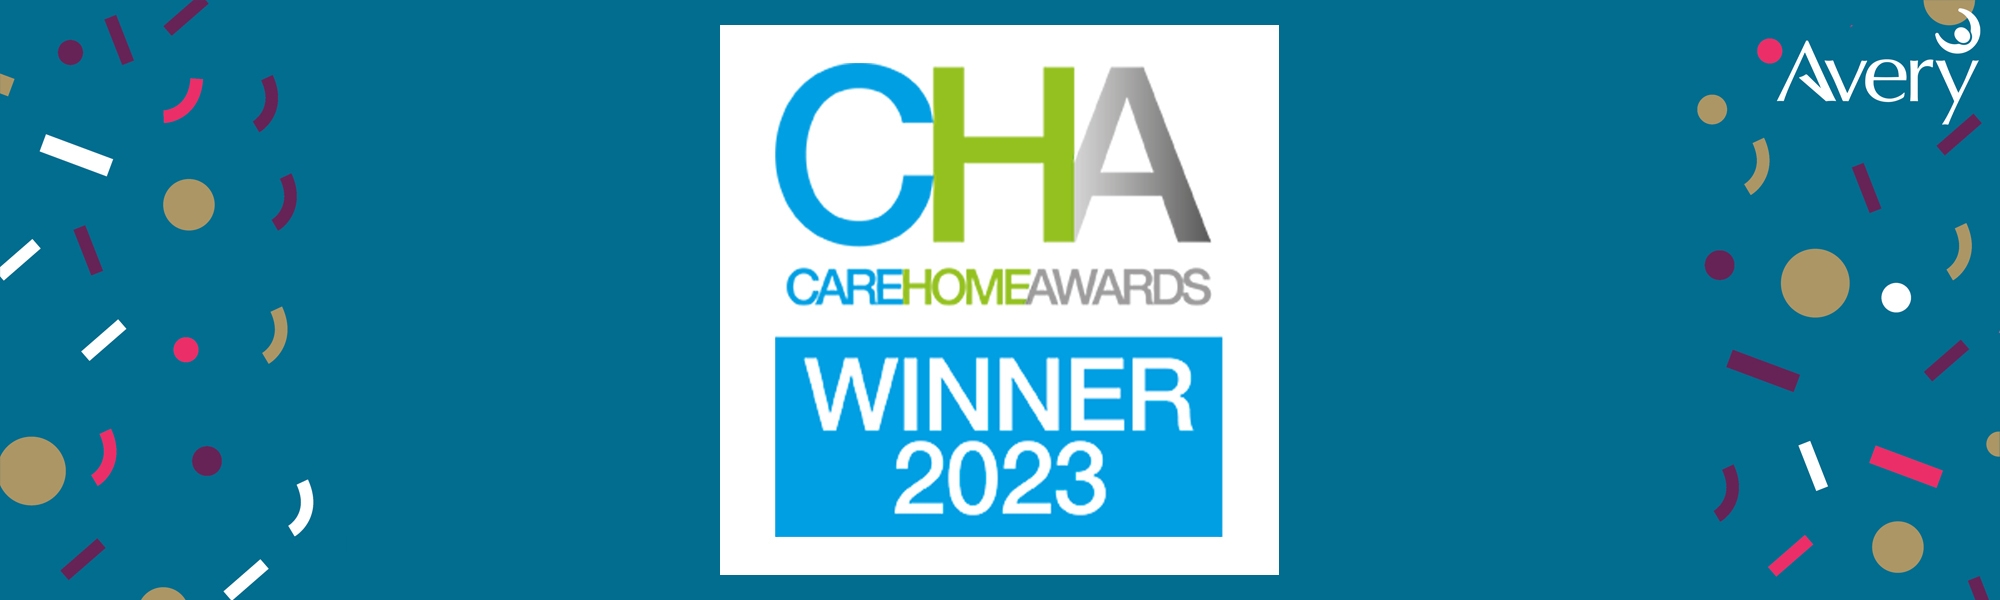 Care Home Awards 2023 Banner Image